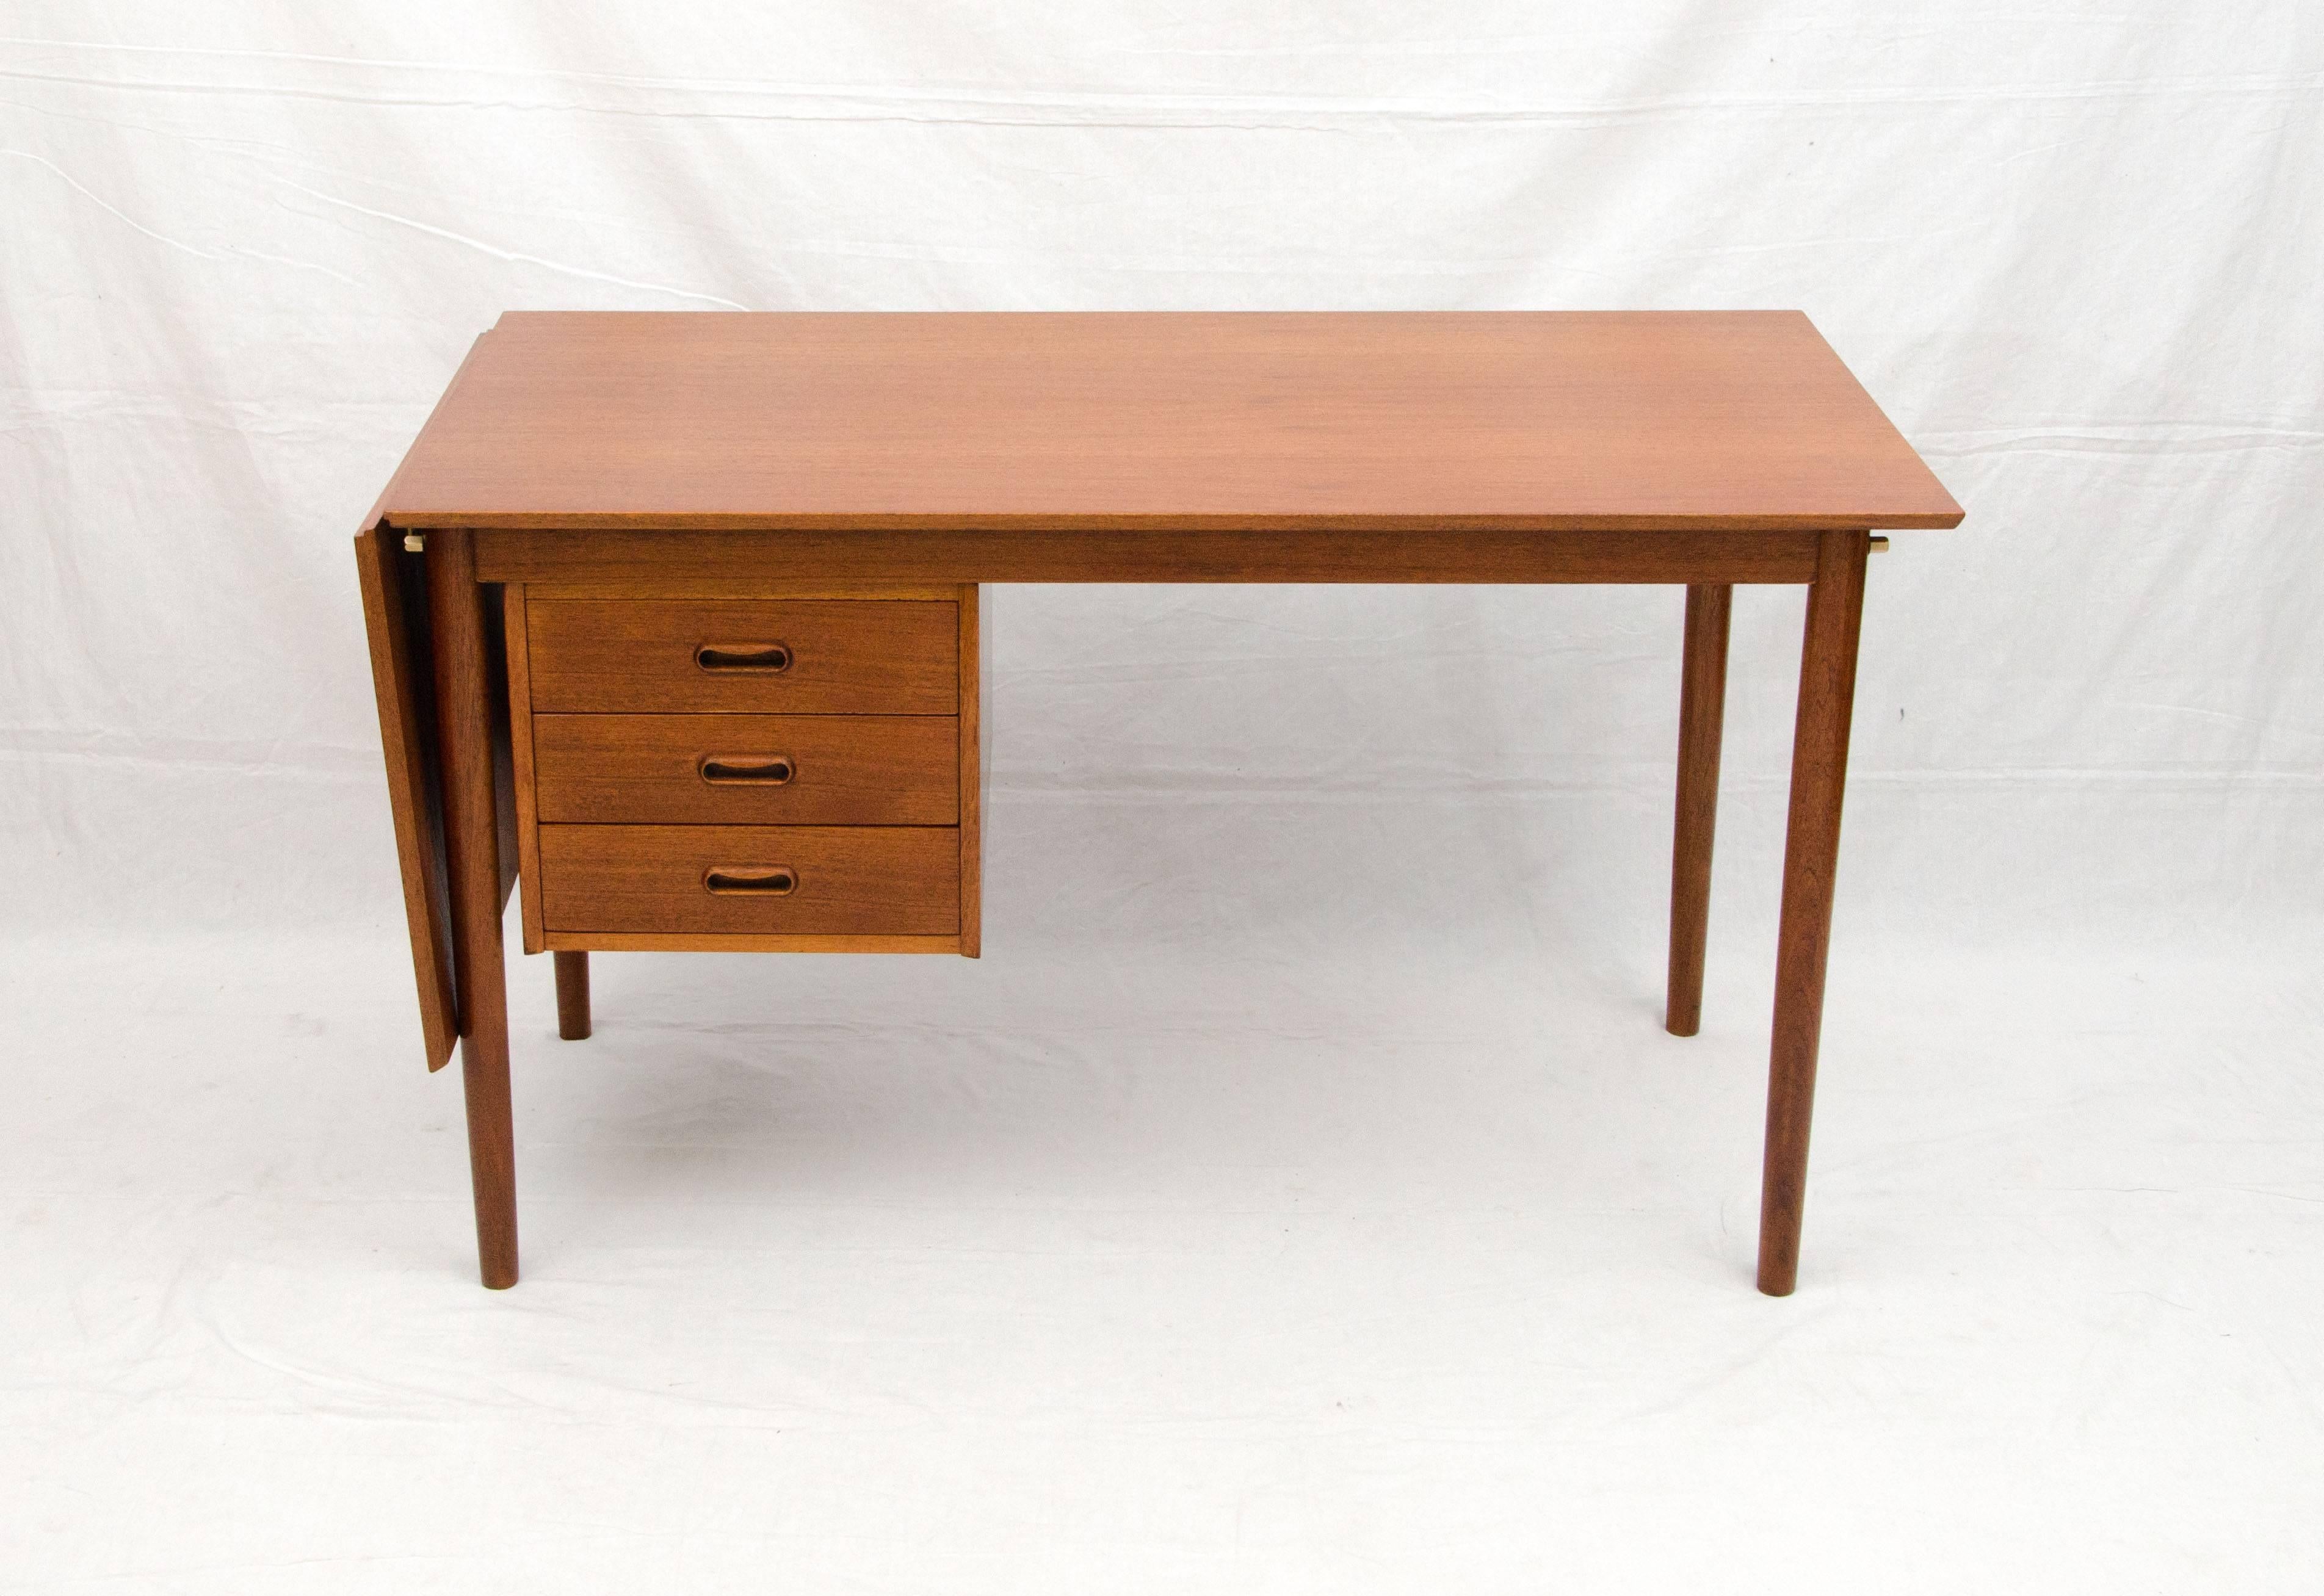 Interesting smaller size desk that can be expanded to a larger work surface by raising the 18